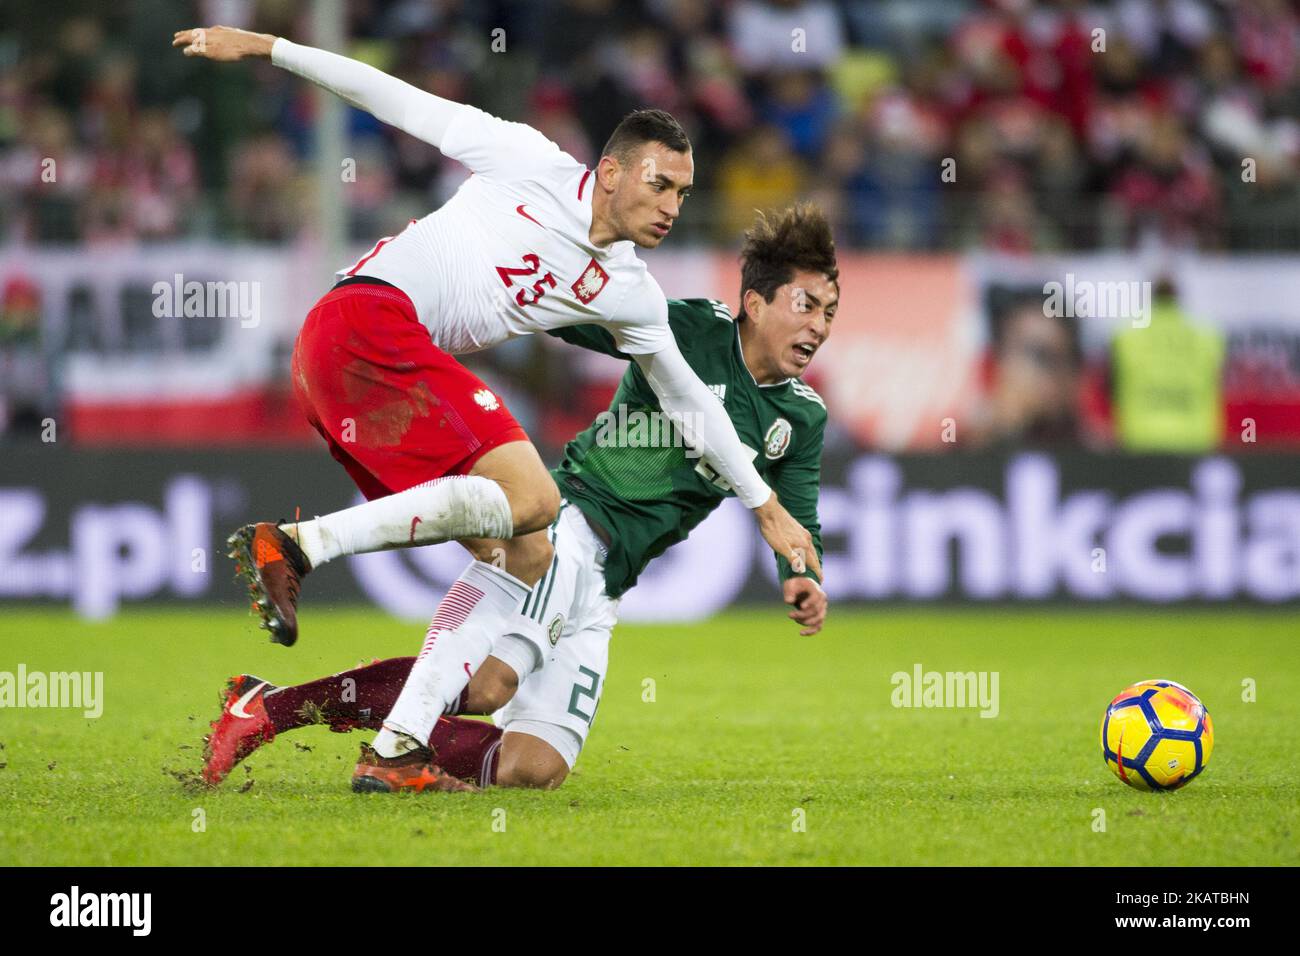 Omar Govea of Mexico fouled by Jaroslaw Jach of Poland during the International Friendly match between Poland and Mexico at Energa Stadium in Gdansk, Poland on November 13, 2017 (Photo by Andrew Surma/NurPhoto) Stock Photo